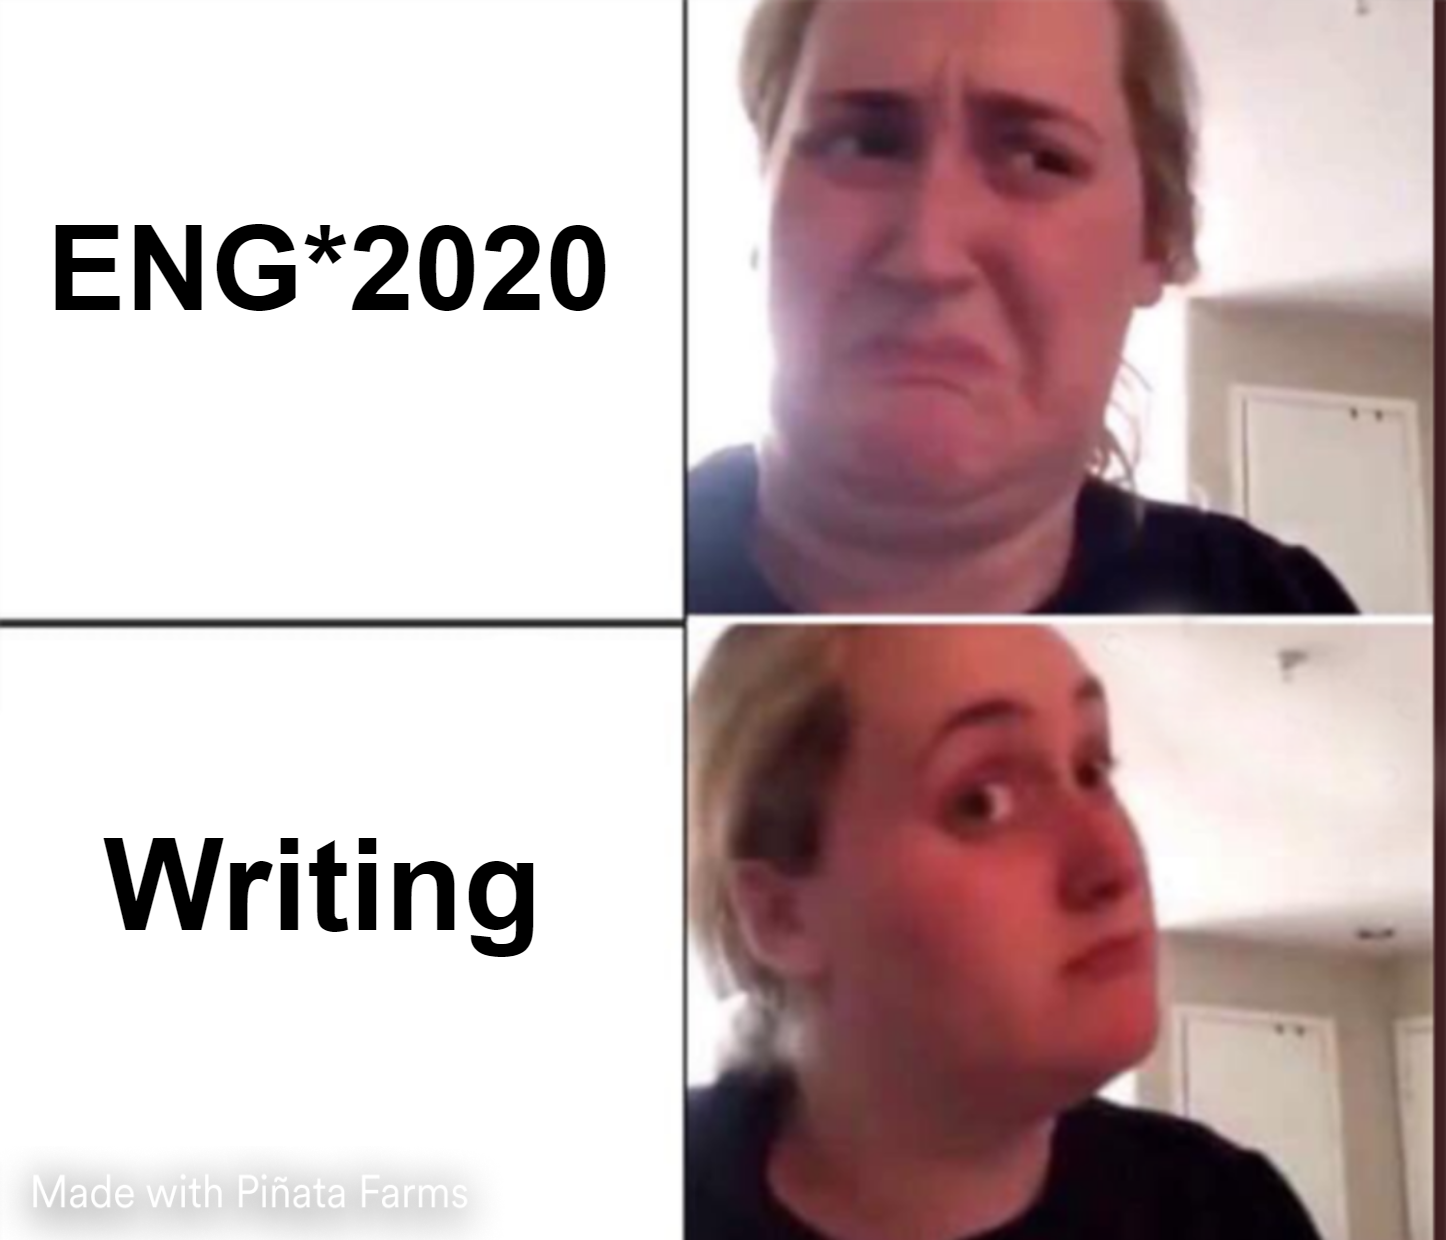 meme that shows the words "ENG*2020" on the left and a woman making a disgusted face on the right side. below, there is the word "Writing" on the bottom left side of the image and a woman making a pleased face on the bottom right side of the image.